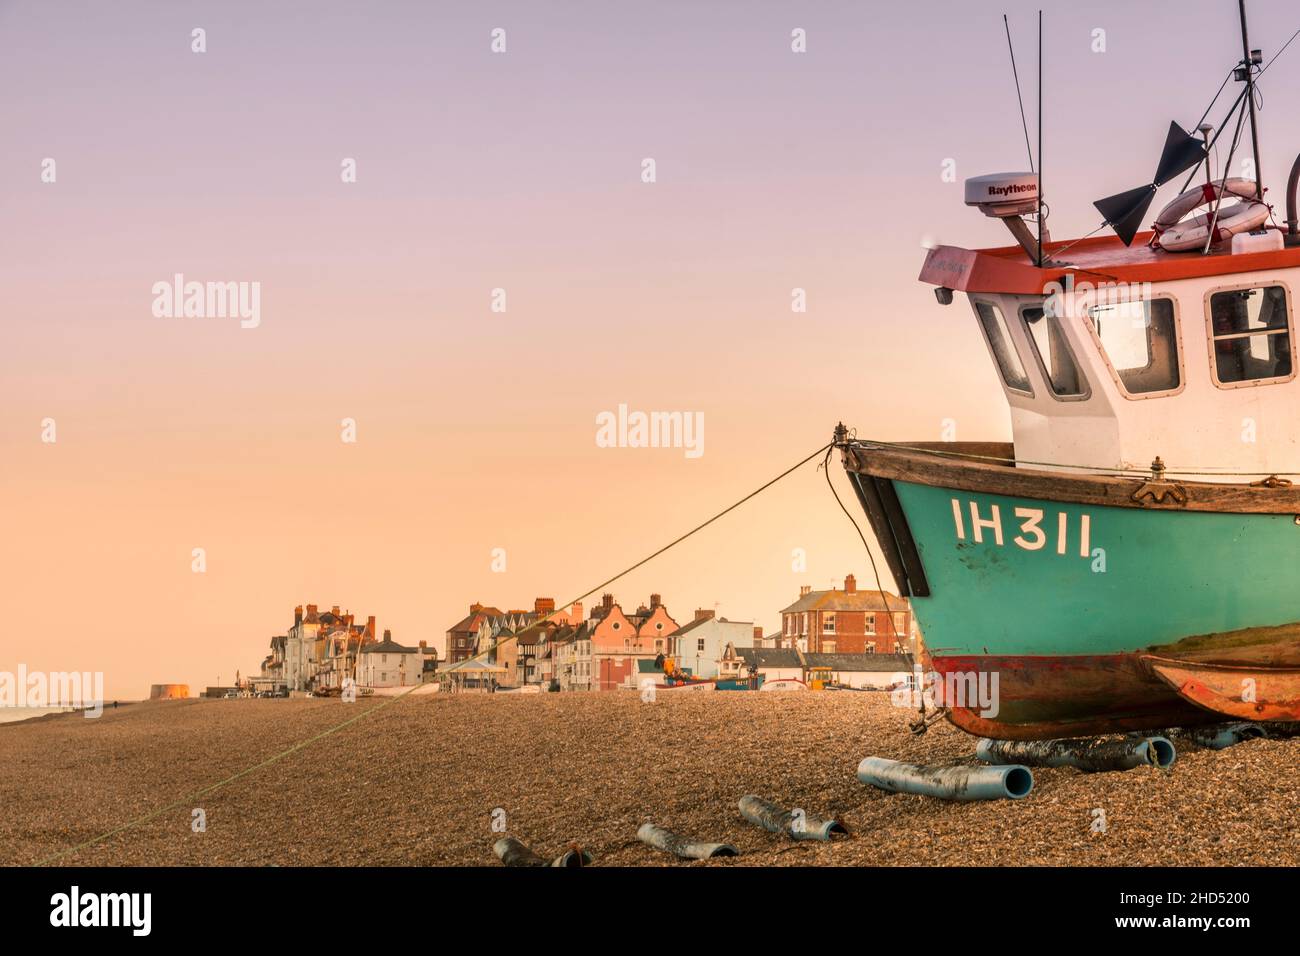 Fishing boat on the beach at Aldeburgh Stock Photo